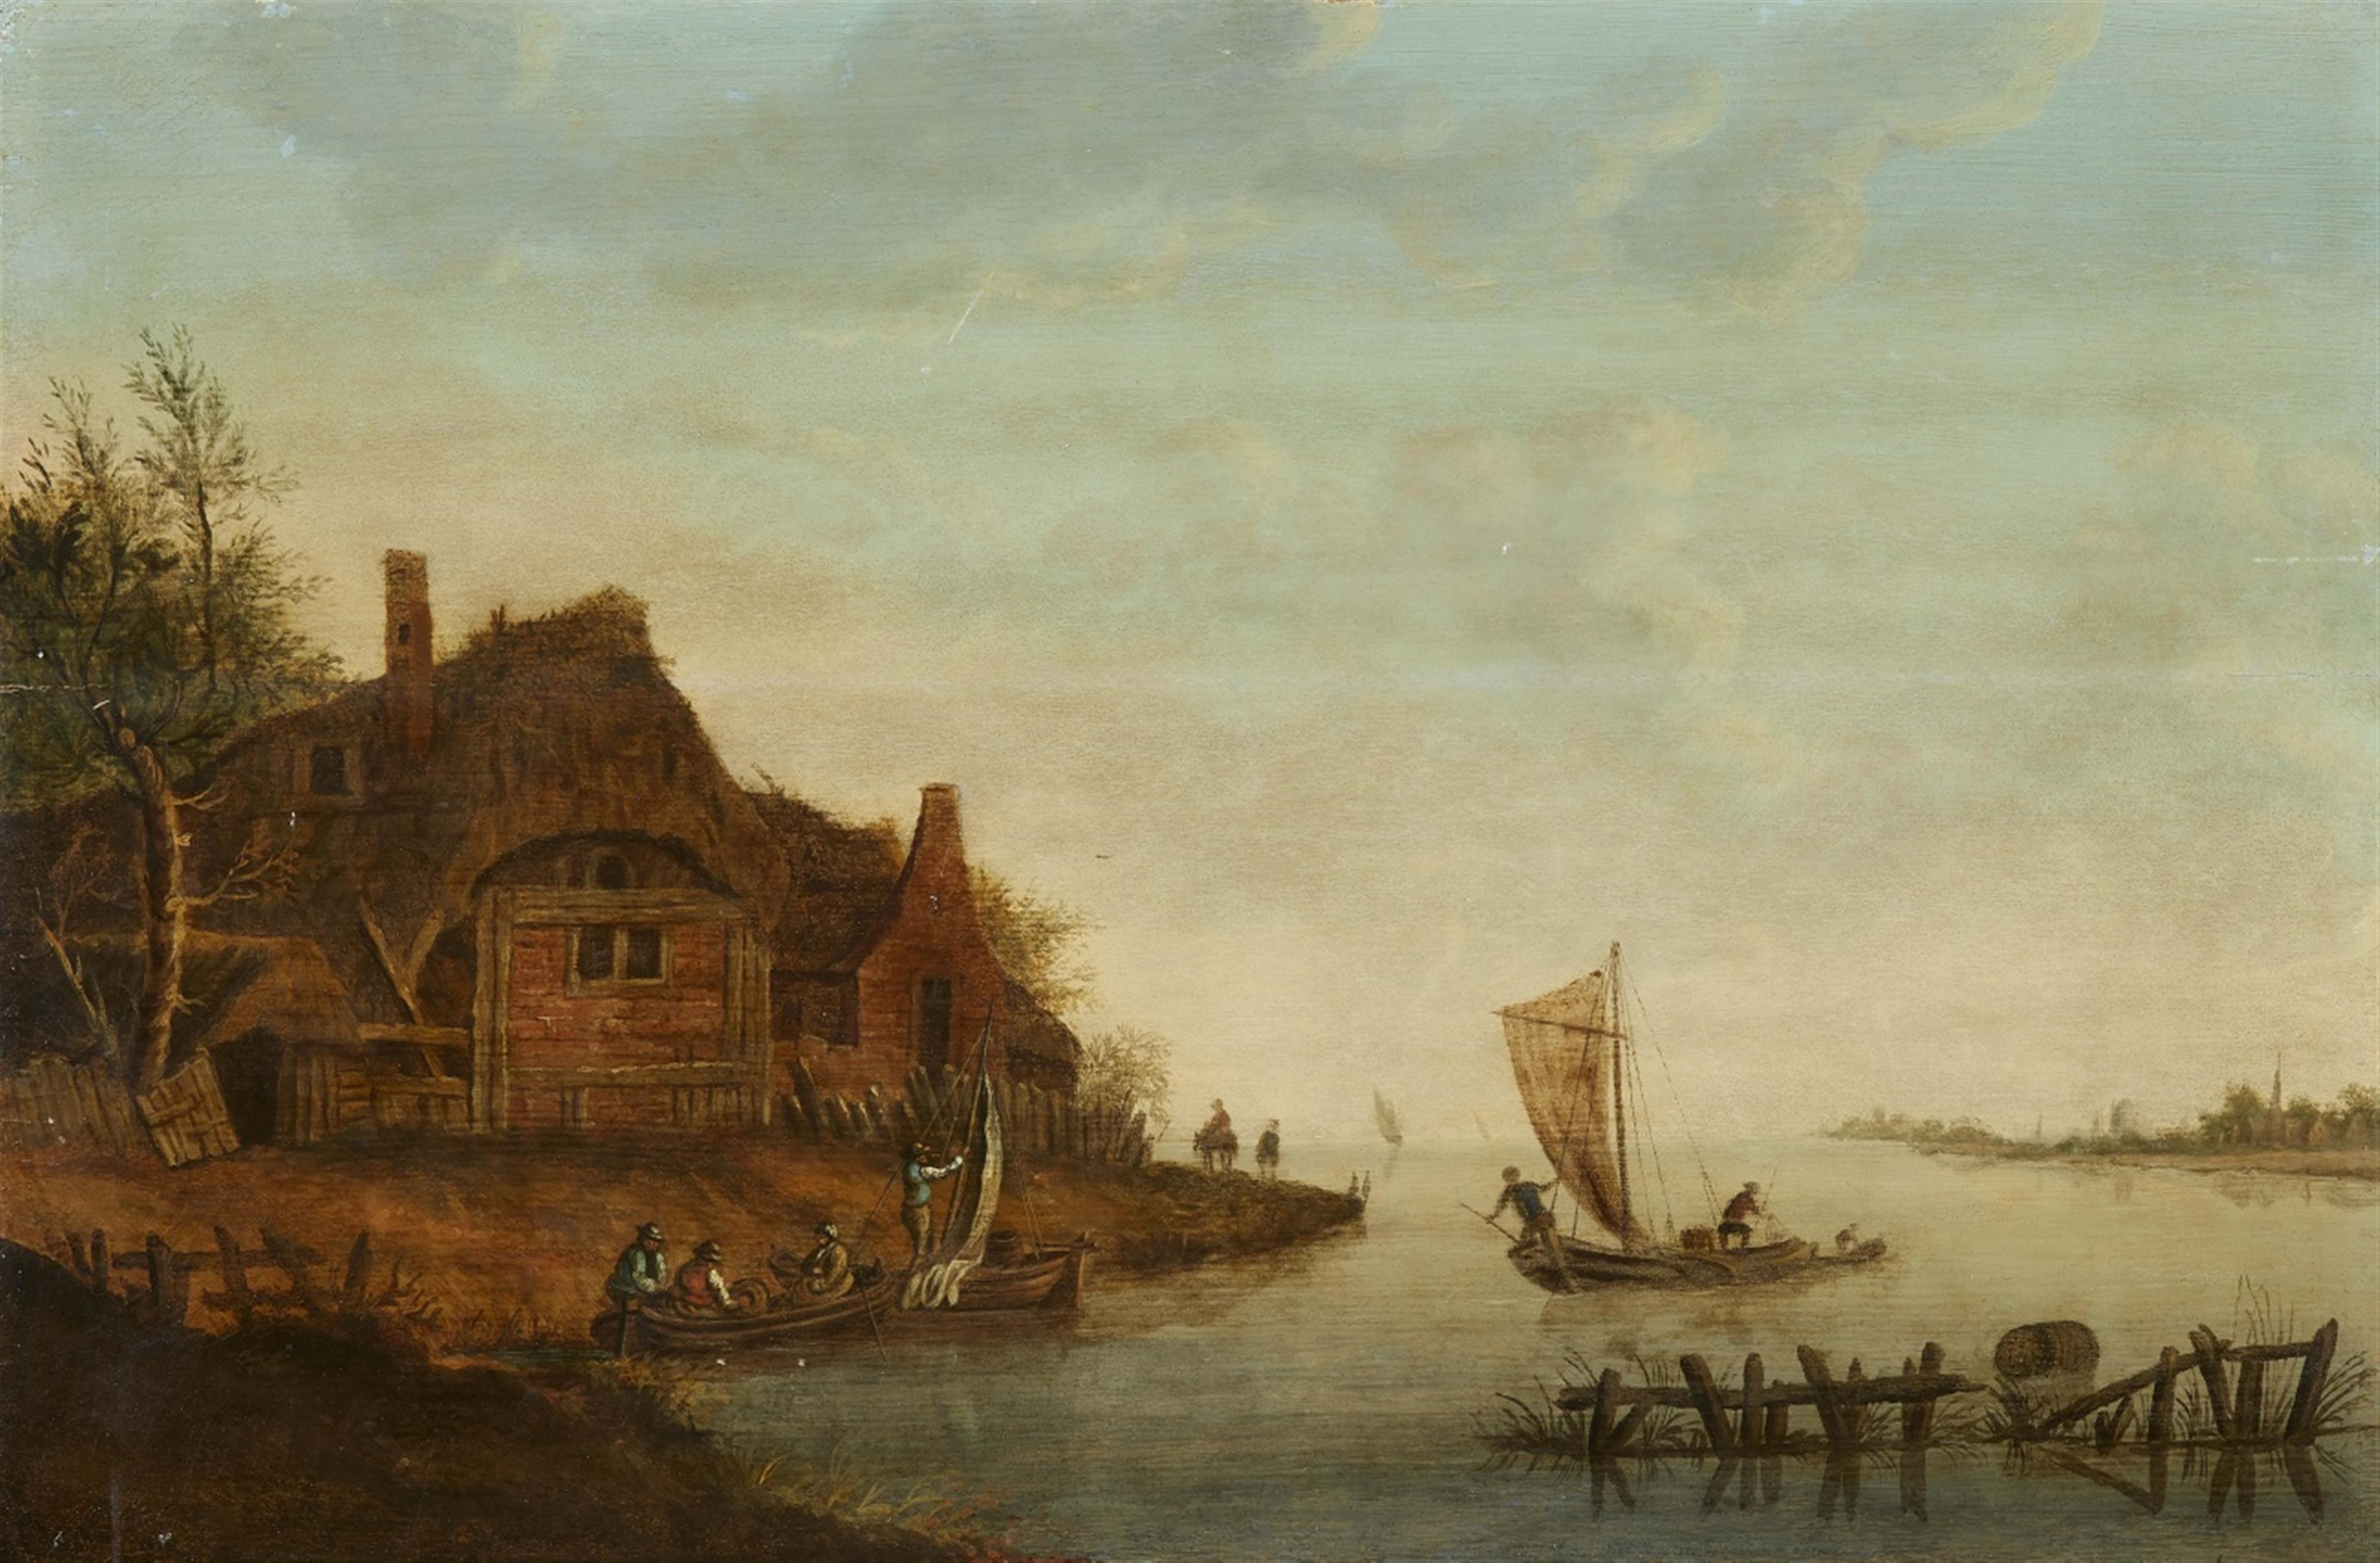 Netherlandish School 17th century - River Landscape with Boats and a Farmhouse - image-1